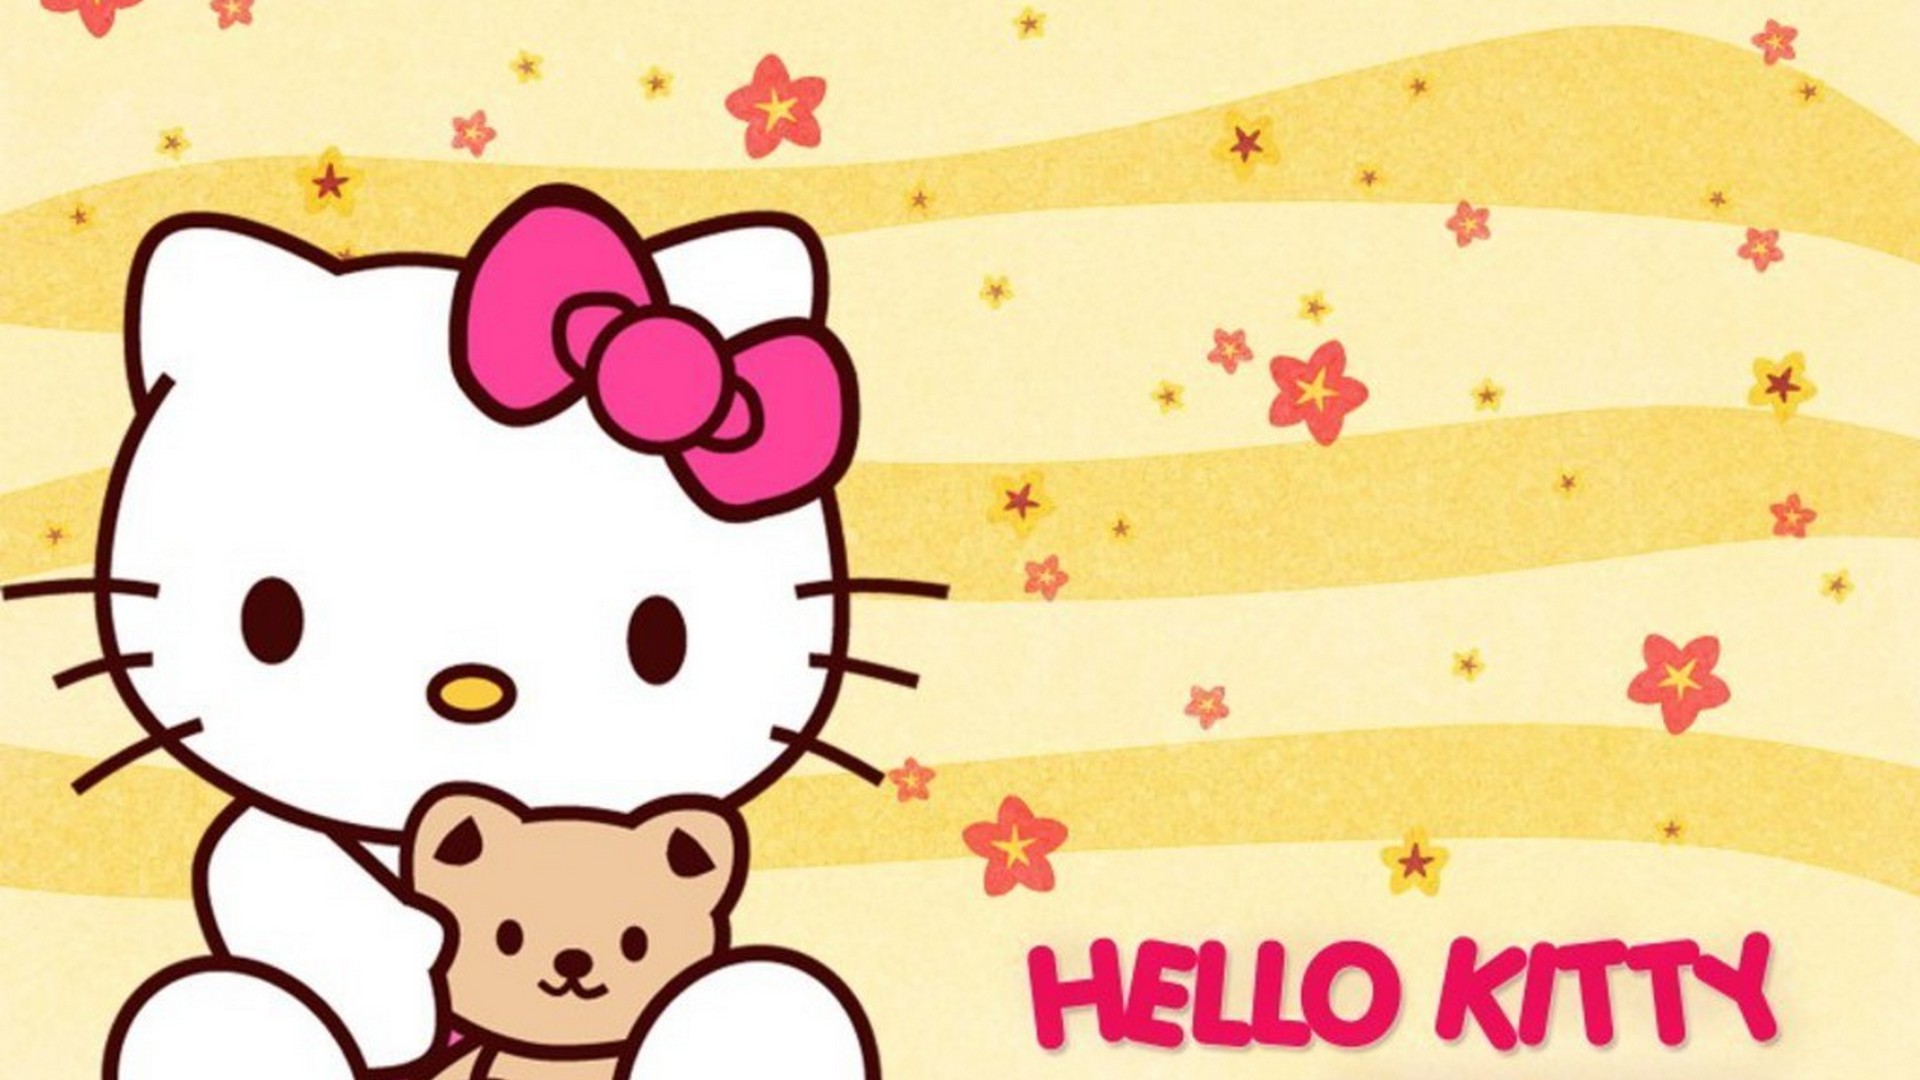 HD Hello Kitty Backgrounds with image resolution 1920x1080 pixel. You can use this wallpaper as background for your desktop Computer Screensavers, Android or iPhone smartphones